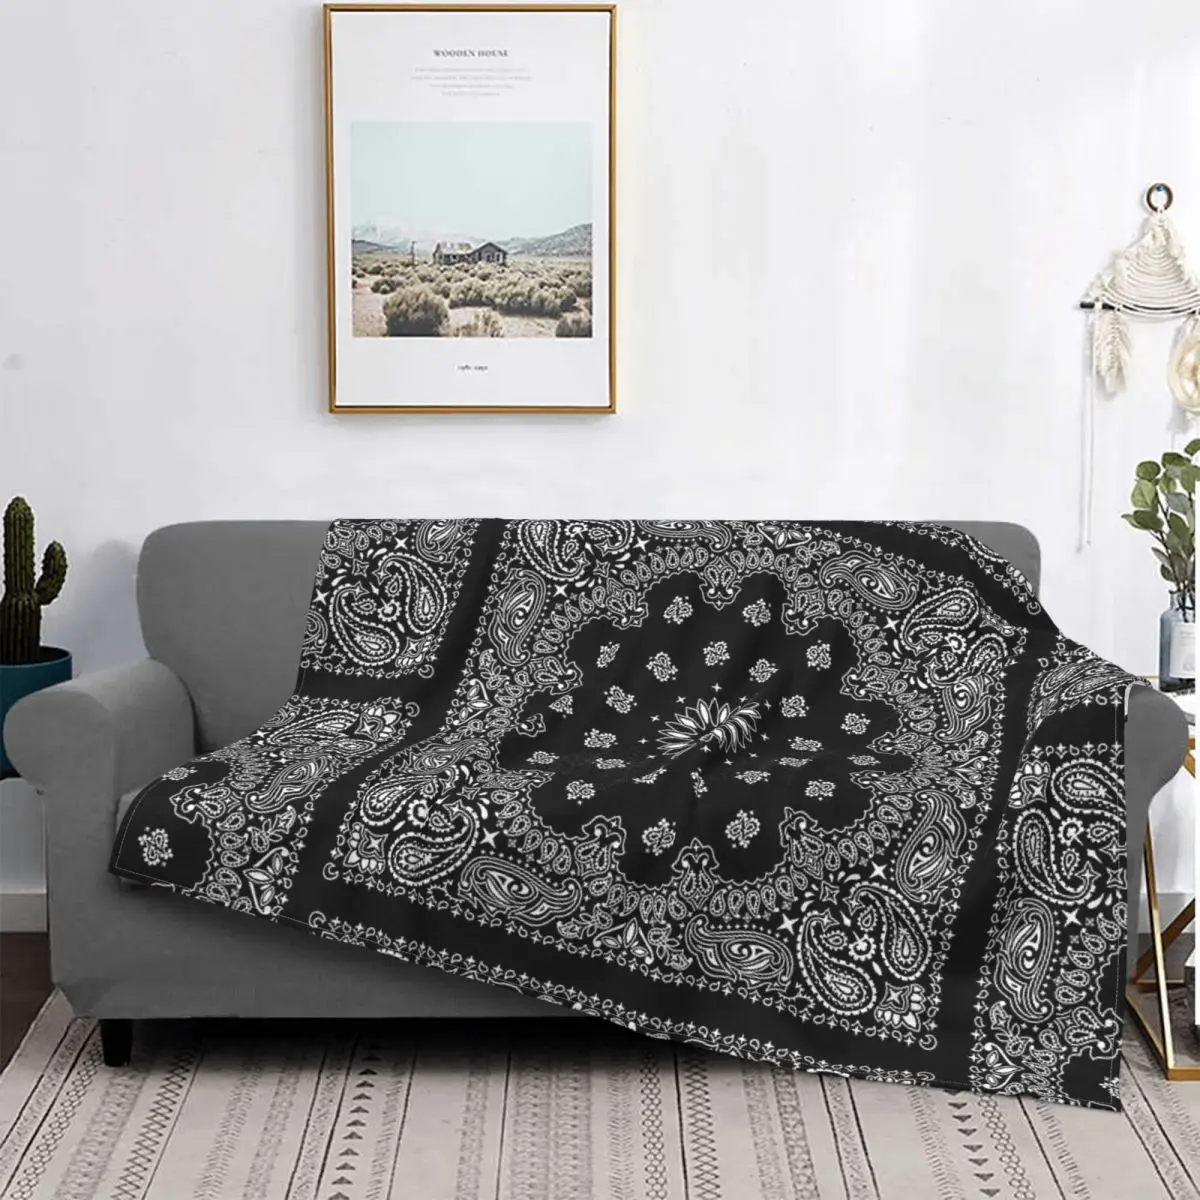 Bandana Black Throw Blanket Cosiness For Home 3D Letters Convertible Sofa Baby Comforter Blanket Sofa Decorative Queen King Size